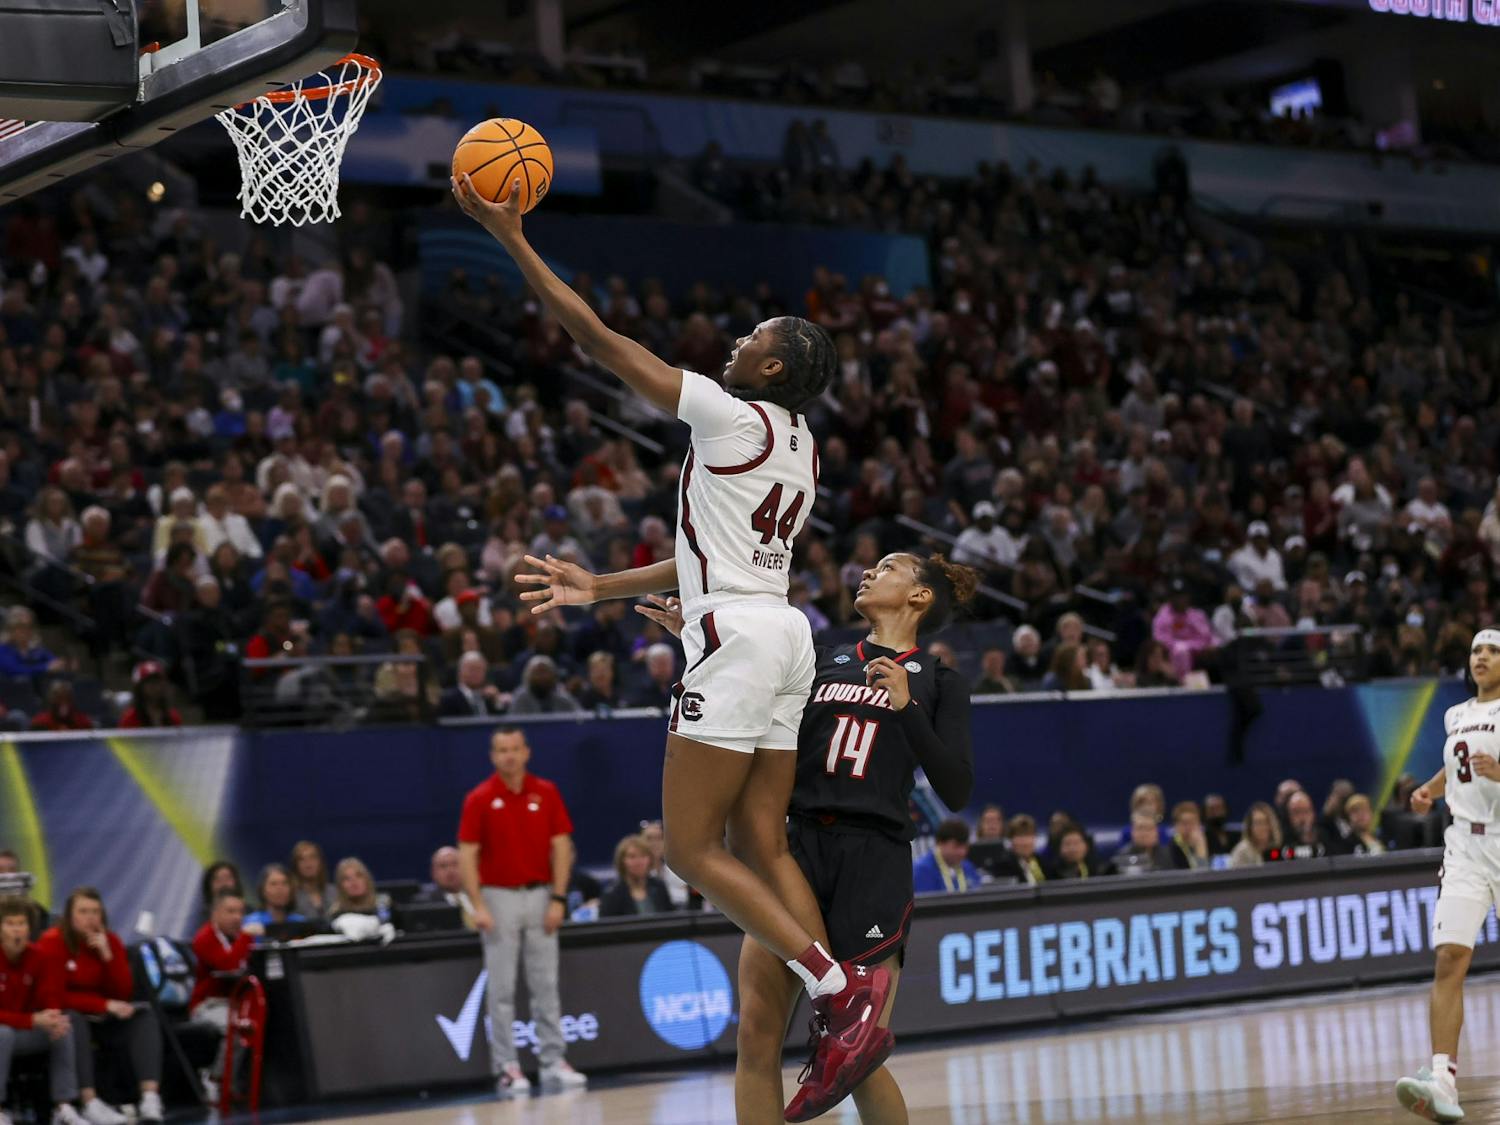 Freshman guard Saniya Rivers goes for a layup during the first quarter of South Carolina's 72-59 victory over Louisville on April 1, 2022, advancing to the National Championship game.